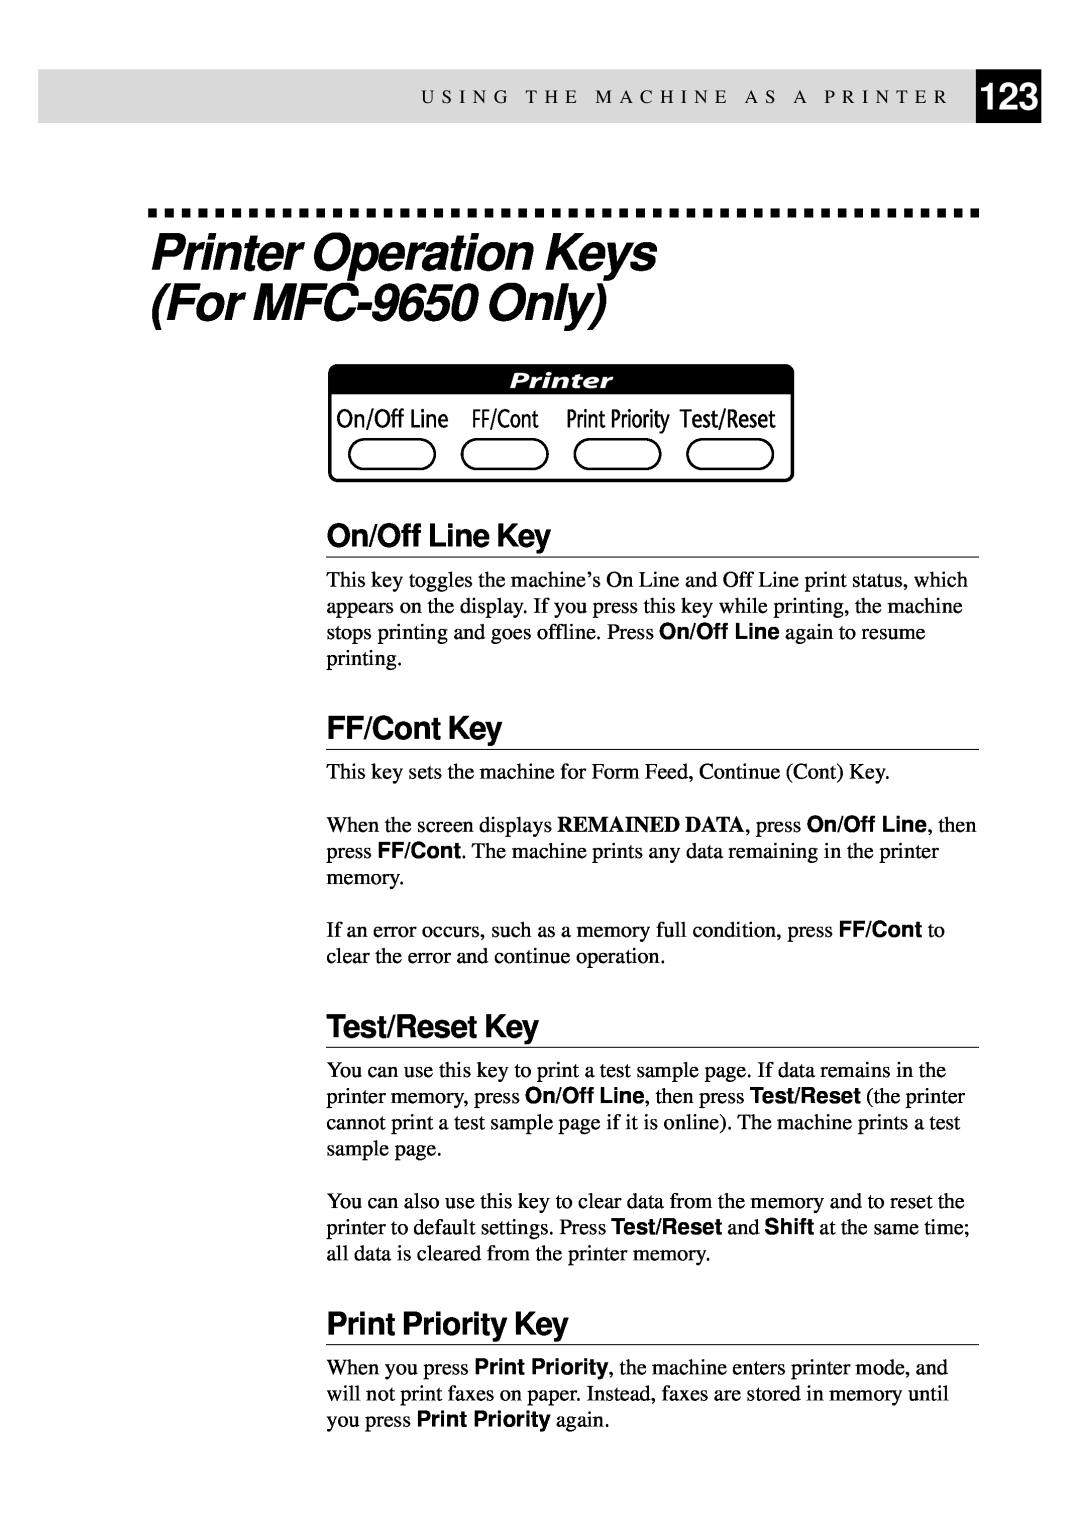 Brother Printer Operation Keys For MFC-9650 Only, On/Off Line Key, FF/Cont Key, Test/Reset Key, Print Priority Key 